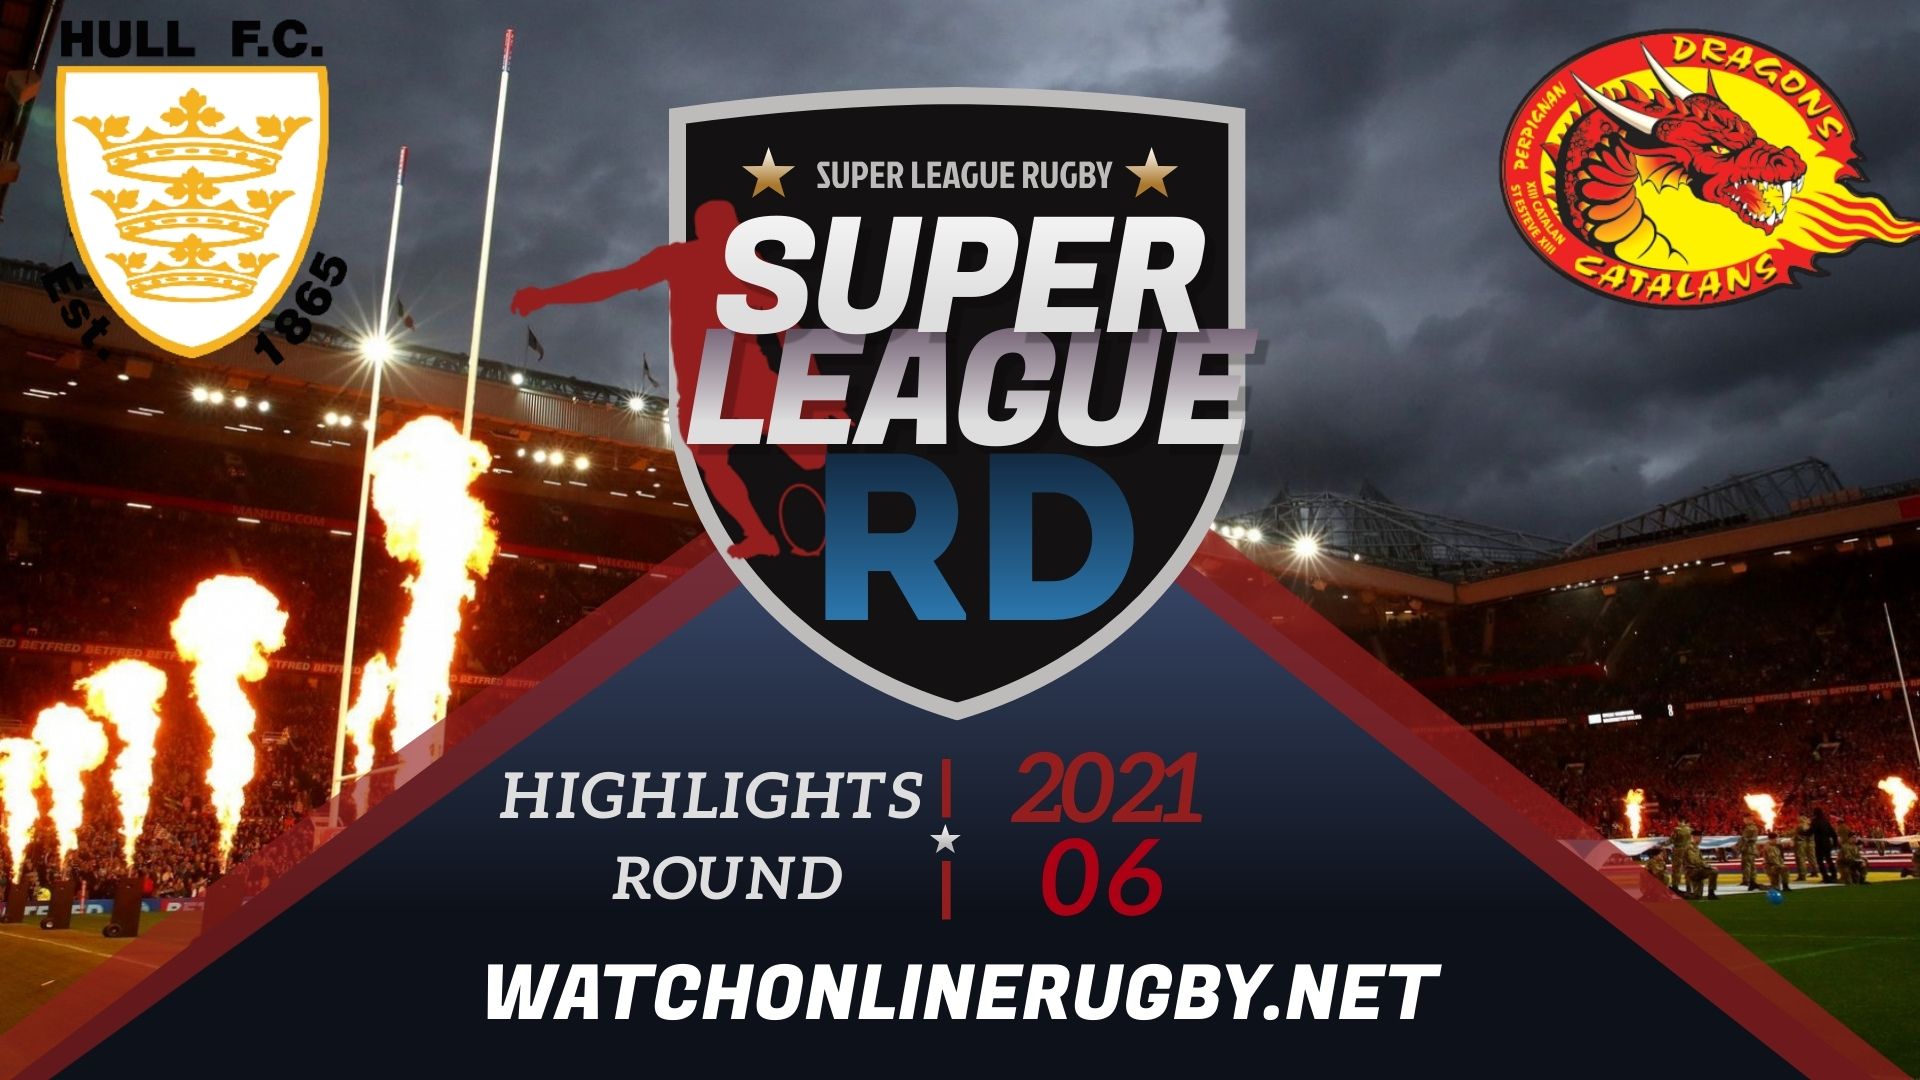 Hull FC Vs Catalans Dragons Super League Rugby 2021 RD 6